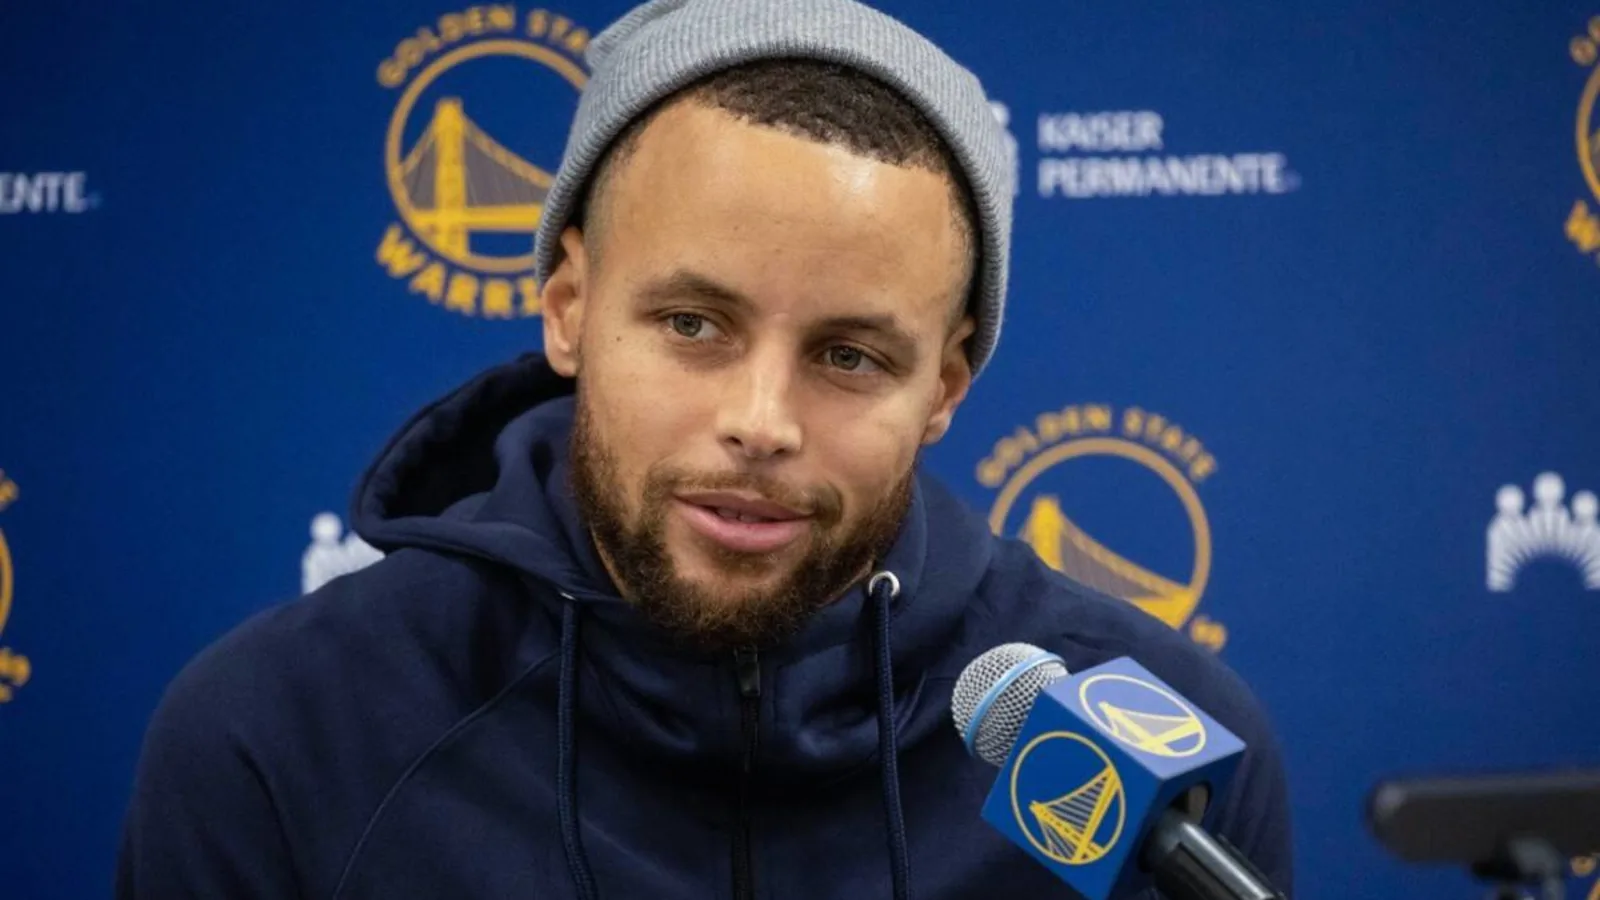 Stephen Curry gives honest statement after Pelicans loss